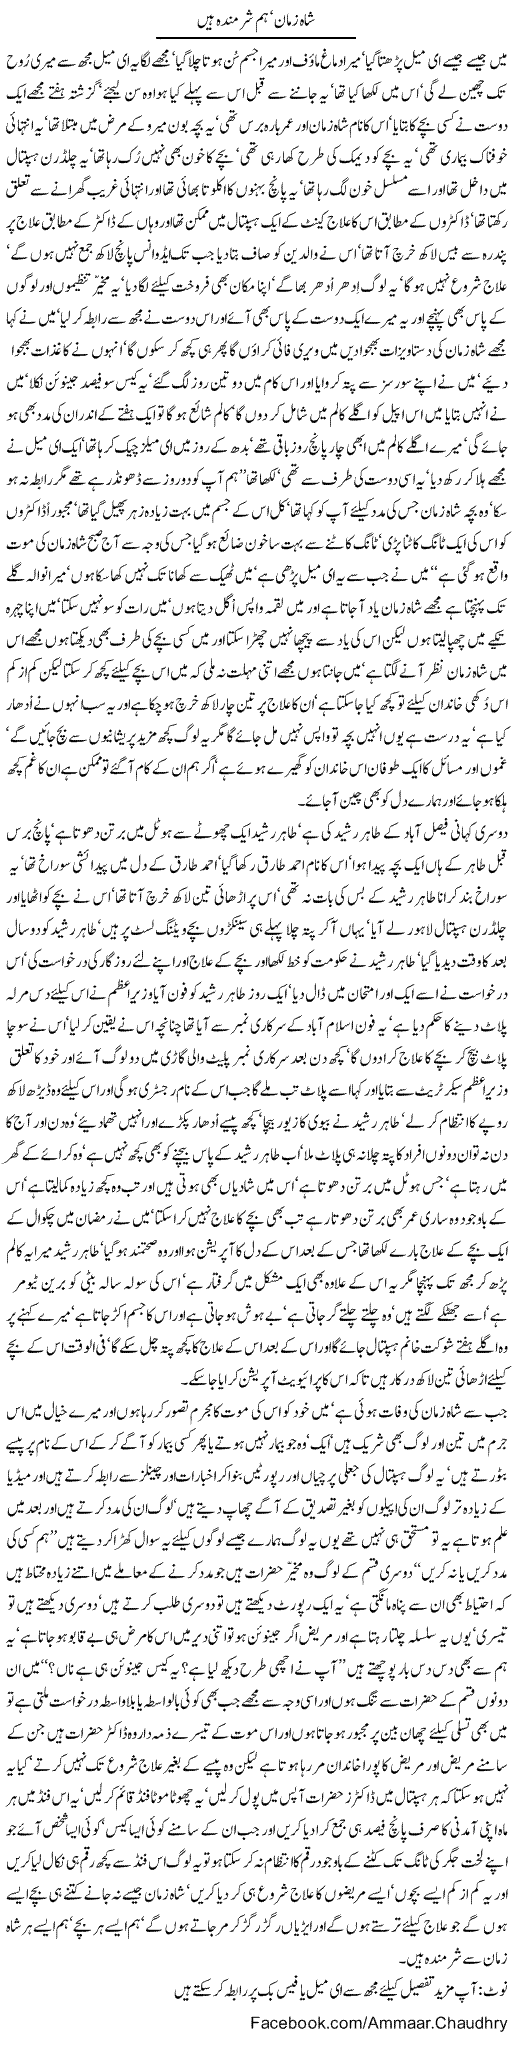 Our Hospitals Express Column Amad Chaudhry 18 December 2011